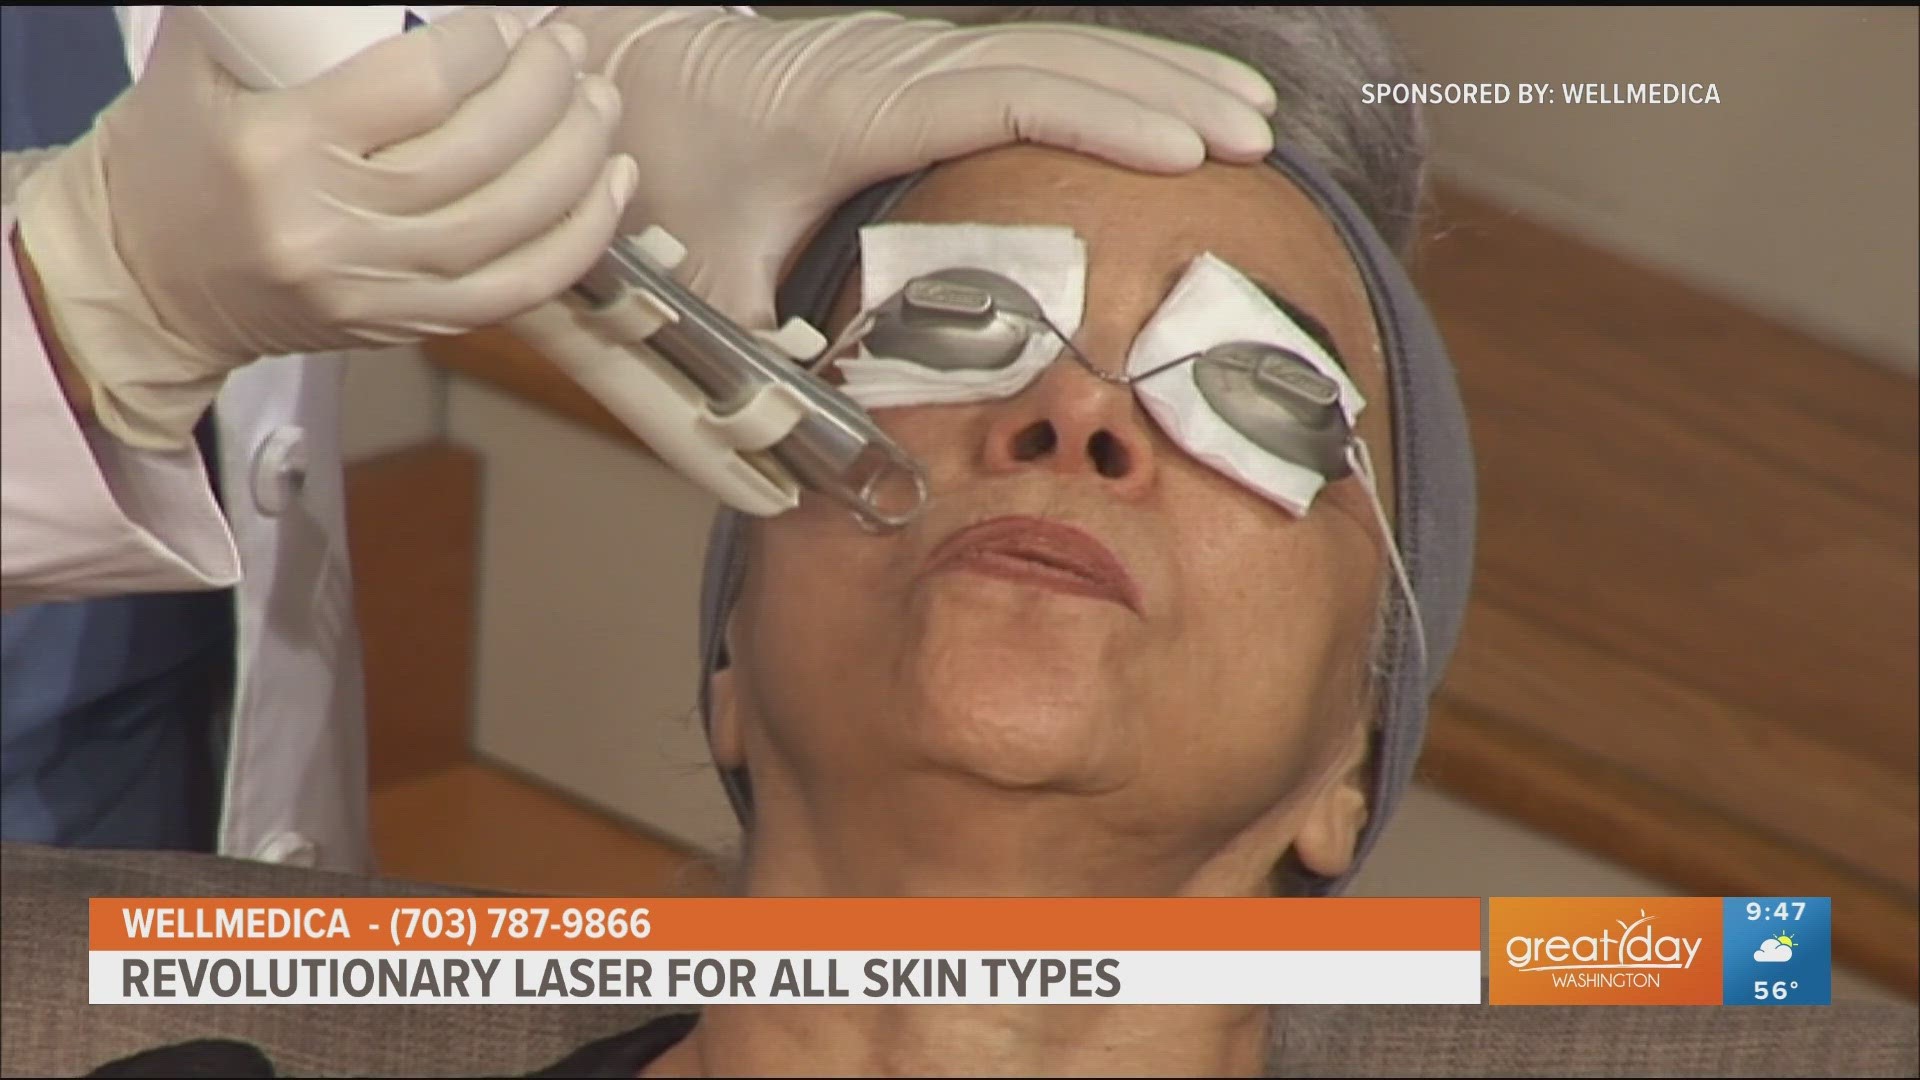 Sponsored by: WellMedica. Dr. Dima Ali demonstrates how the ULTRACLEAR Laser corrects many different skin concerns! For more info call 703-787-9866.